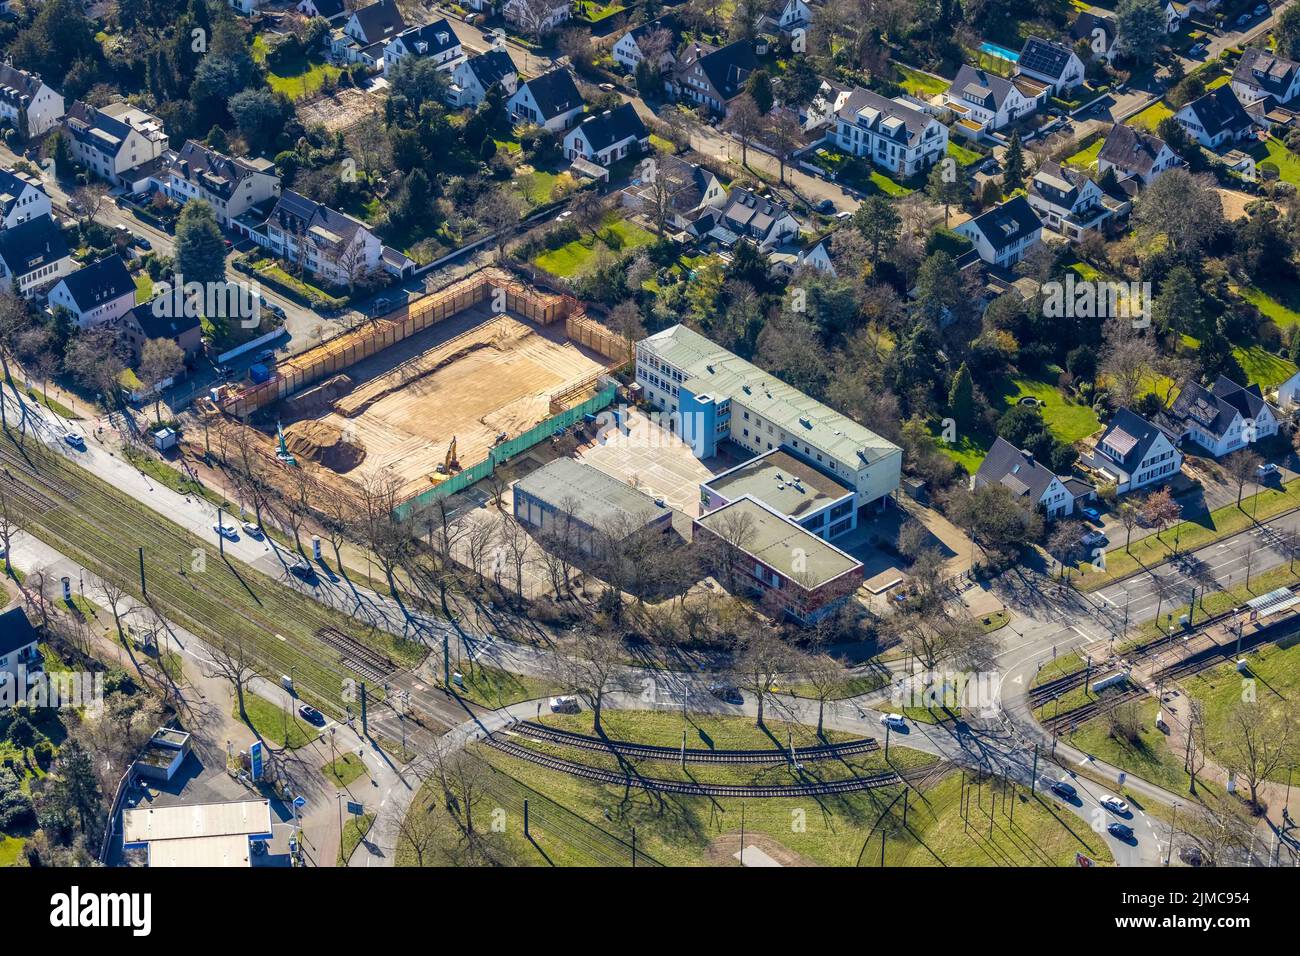 Aerial view, construction site and demolition of the former FFFZ building on Kaiserswerther Straße next to GGS Beckbusch-Schule in the Stockum distric Stock Photo